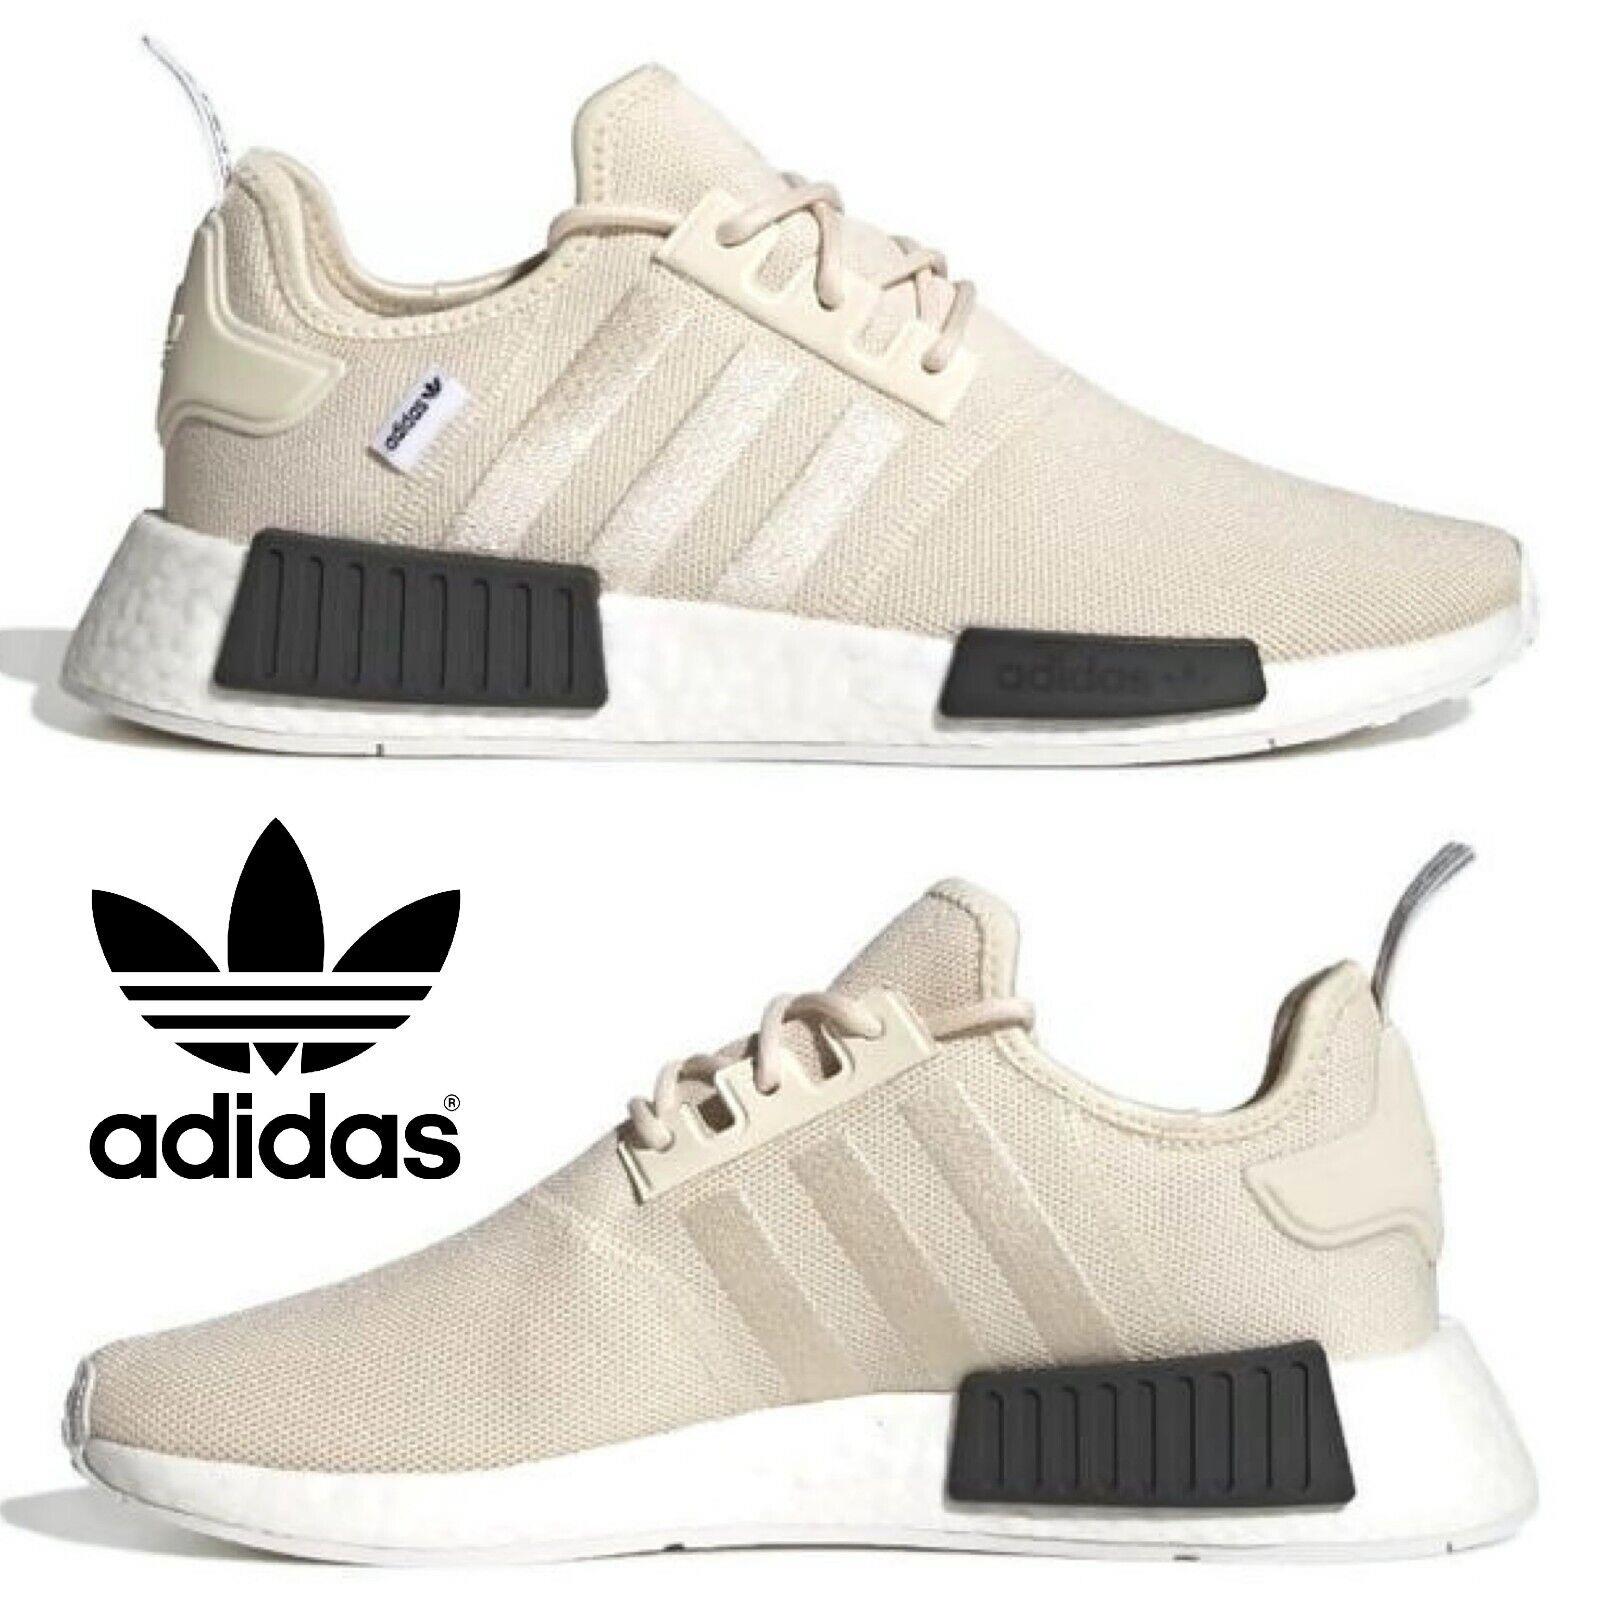 Adidas Originals Nmd R1 Men`s Sneakers Running Shoes Gym Casual Sport Beige